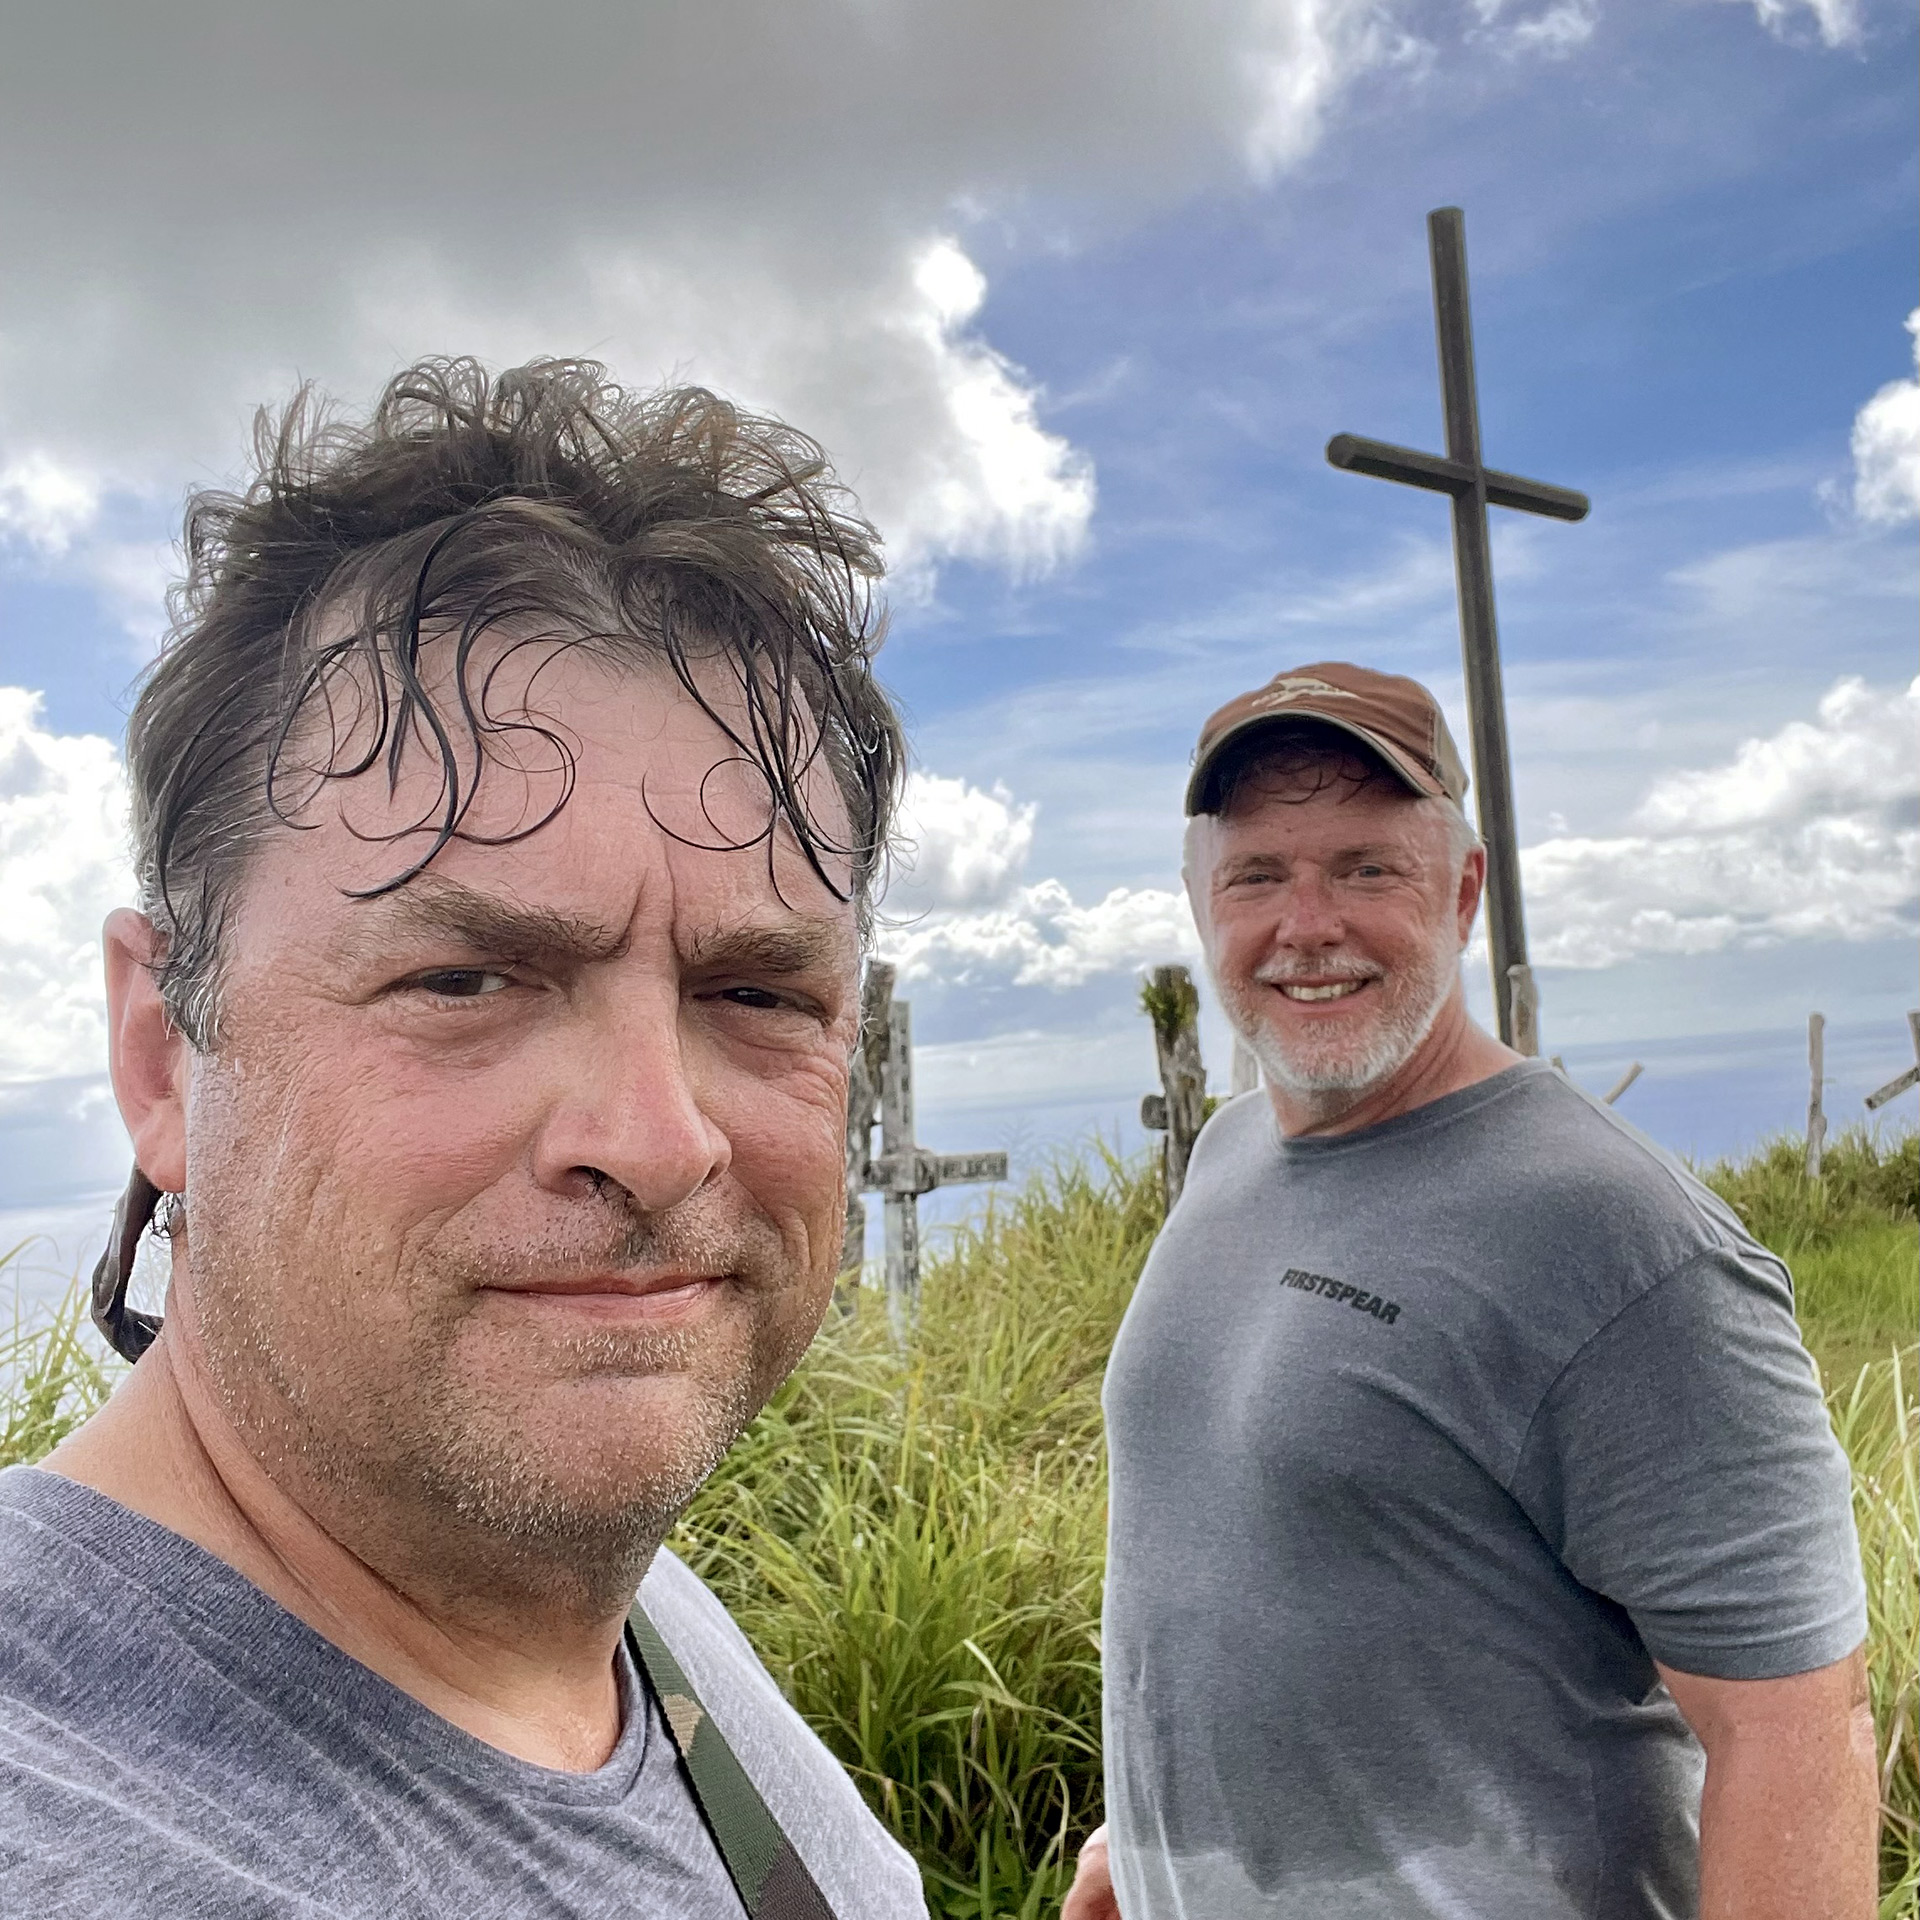 The author, Russell Worth Parker, with his fellow veteran and diver John Dailey on top of Mount Lamlam in Guam. Lamlam rises from the bottom of the nearby Marianas Trench. If it were entirely above ground, it would be taller than Mount Everest (photograph by Russell Worth Parker).